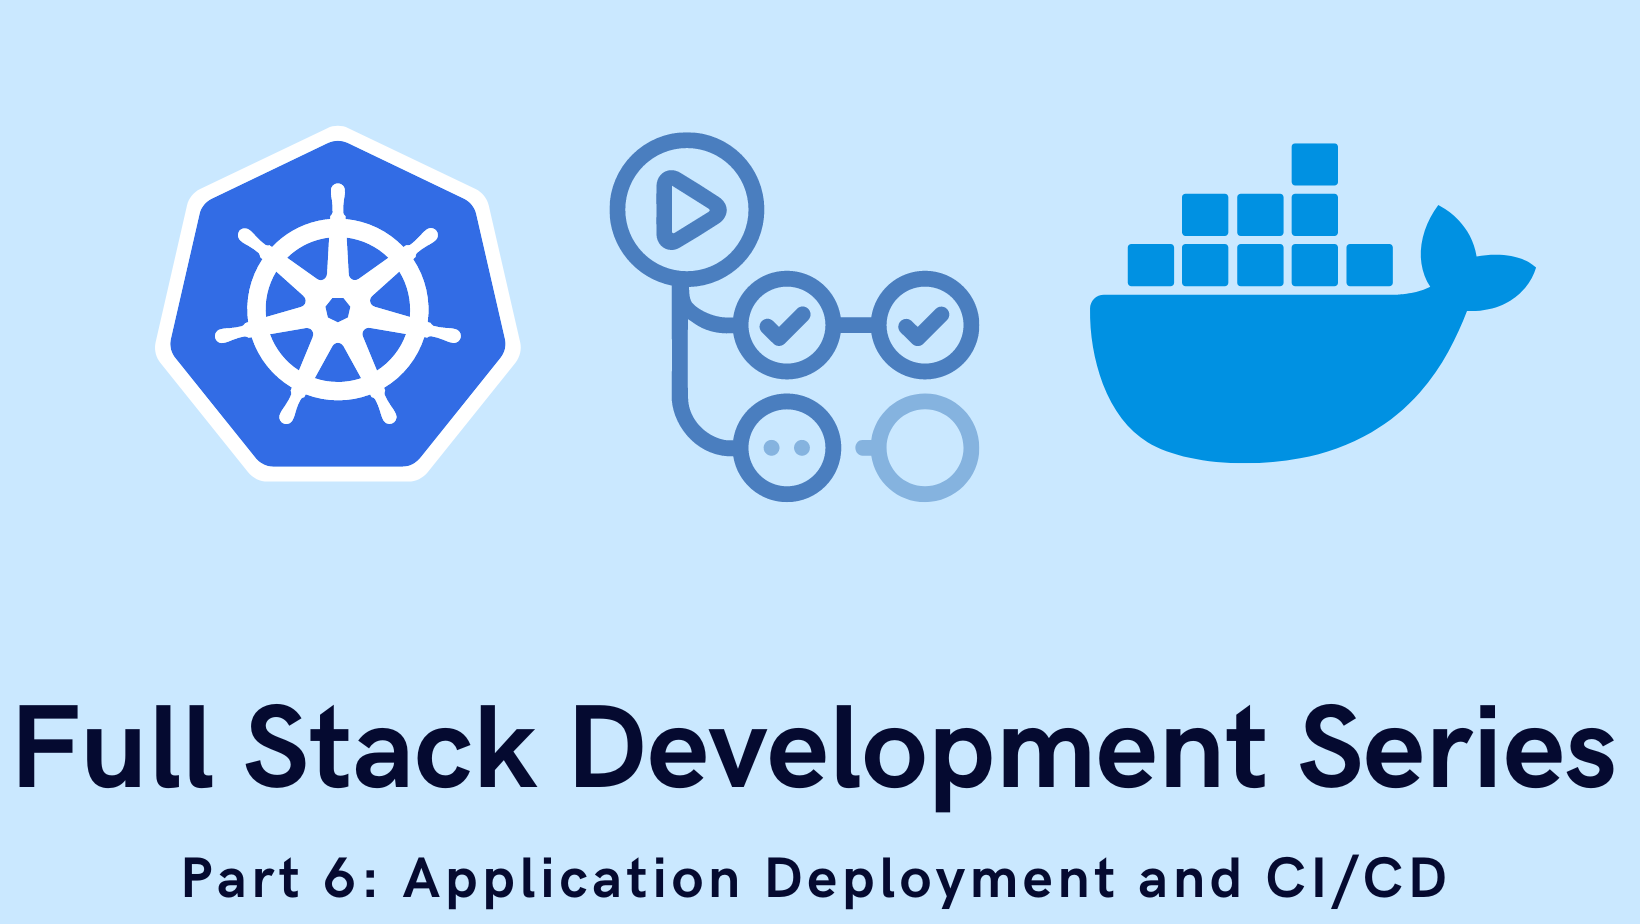 Full Stack Development Series Part 6: Application Deployment and CI/CD